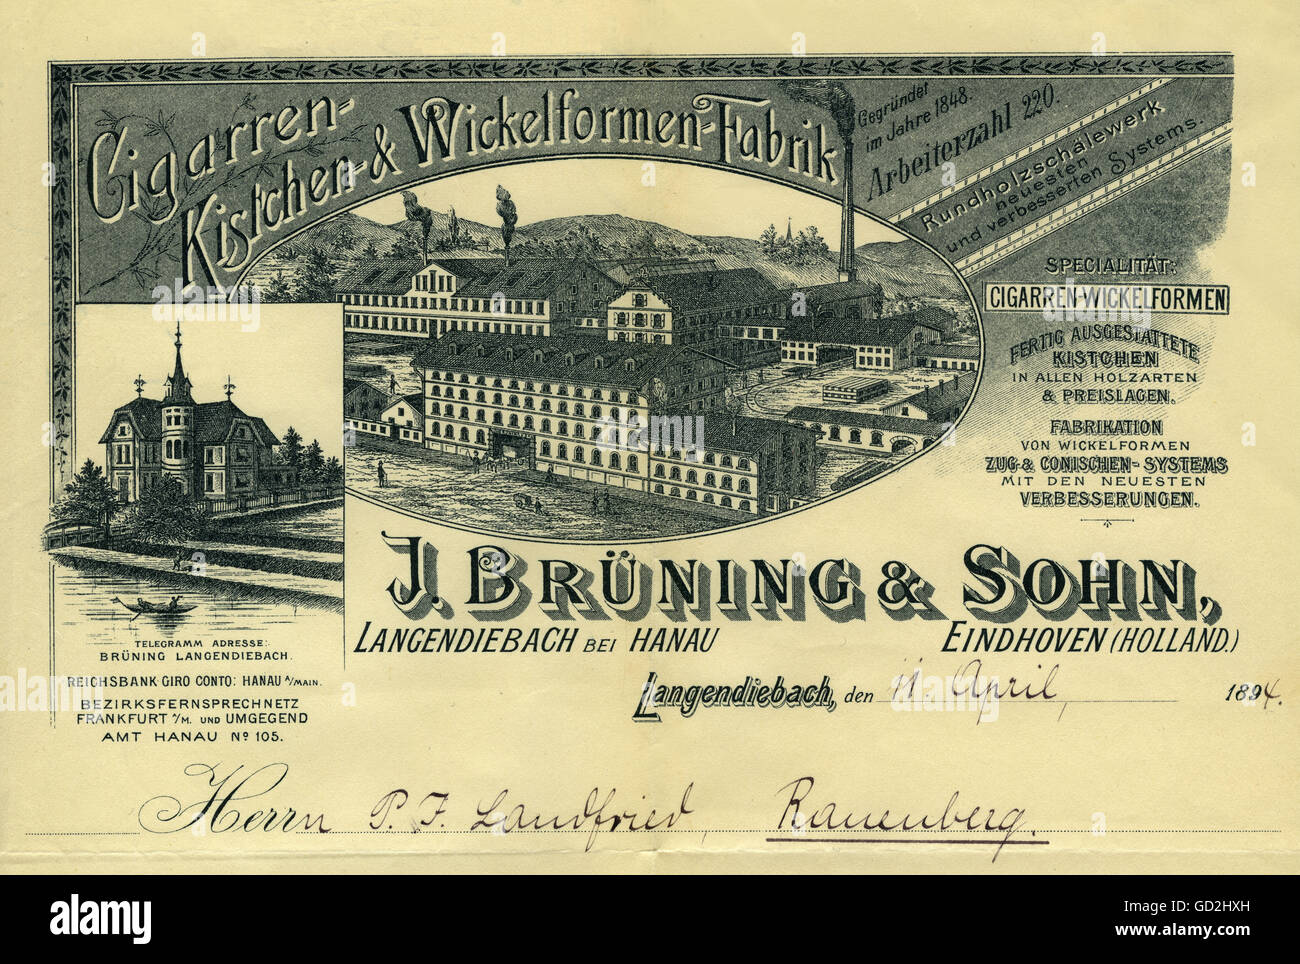 documents,Cigarren-Kistchen-Wickelformen Factory J. Bruening & Son,Langendiebach near Hanau,established 1848,number of workers: 220,letterhead,Germany,1894,skip,skips,detail,details,invoice head,steel engraving,steel engravings,company view,company site,plant view,companies,stock corporation,incorporated company,stock corporations,company image,producer cigar box veneers,cigar box,cigar industry,tobacco industry,wood processing,producer,manufacturer,producers,manufacturers,industry,industries,history of the company,company his,Additional-Rights-Clearences-Not Available Stock Photo